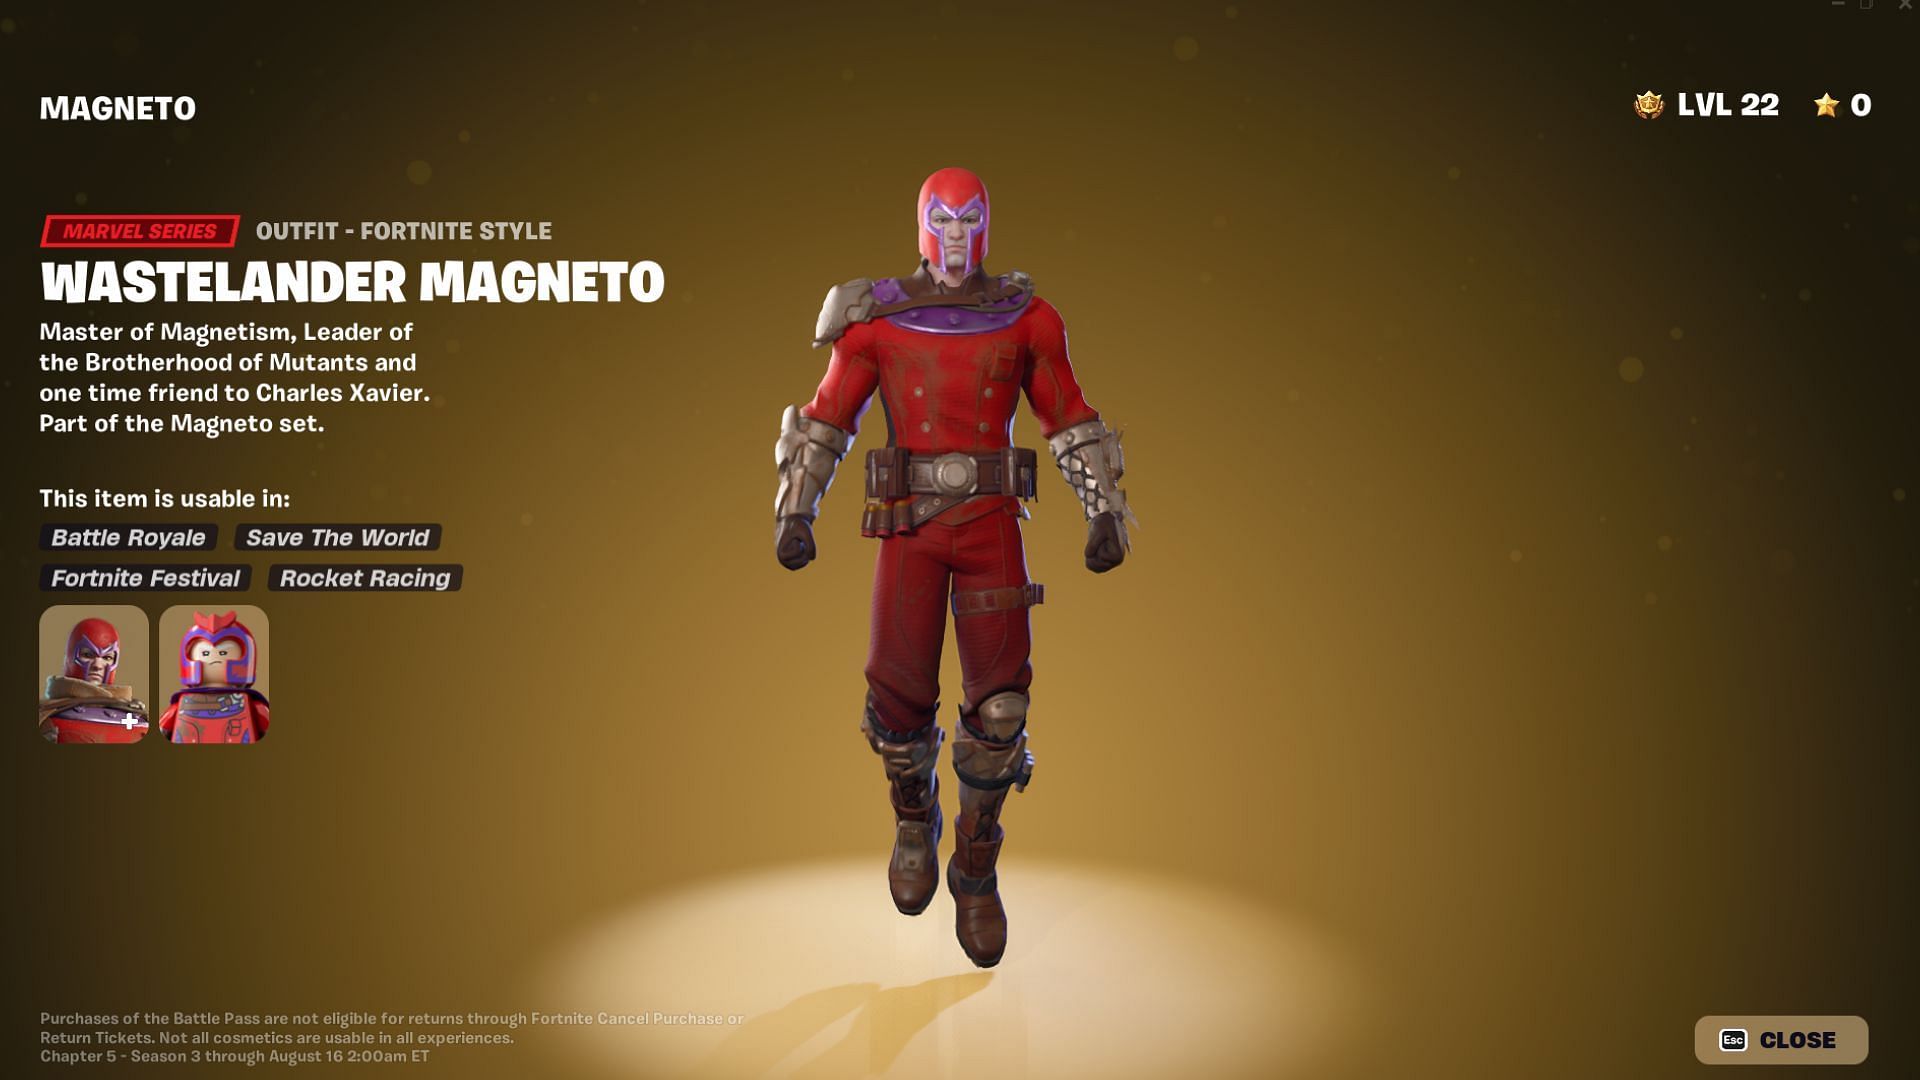 Fortnite leaks hint at what to expect from Wastelander Magneto collaboration